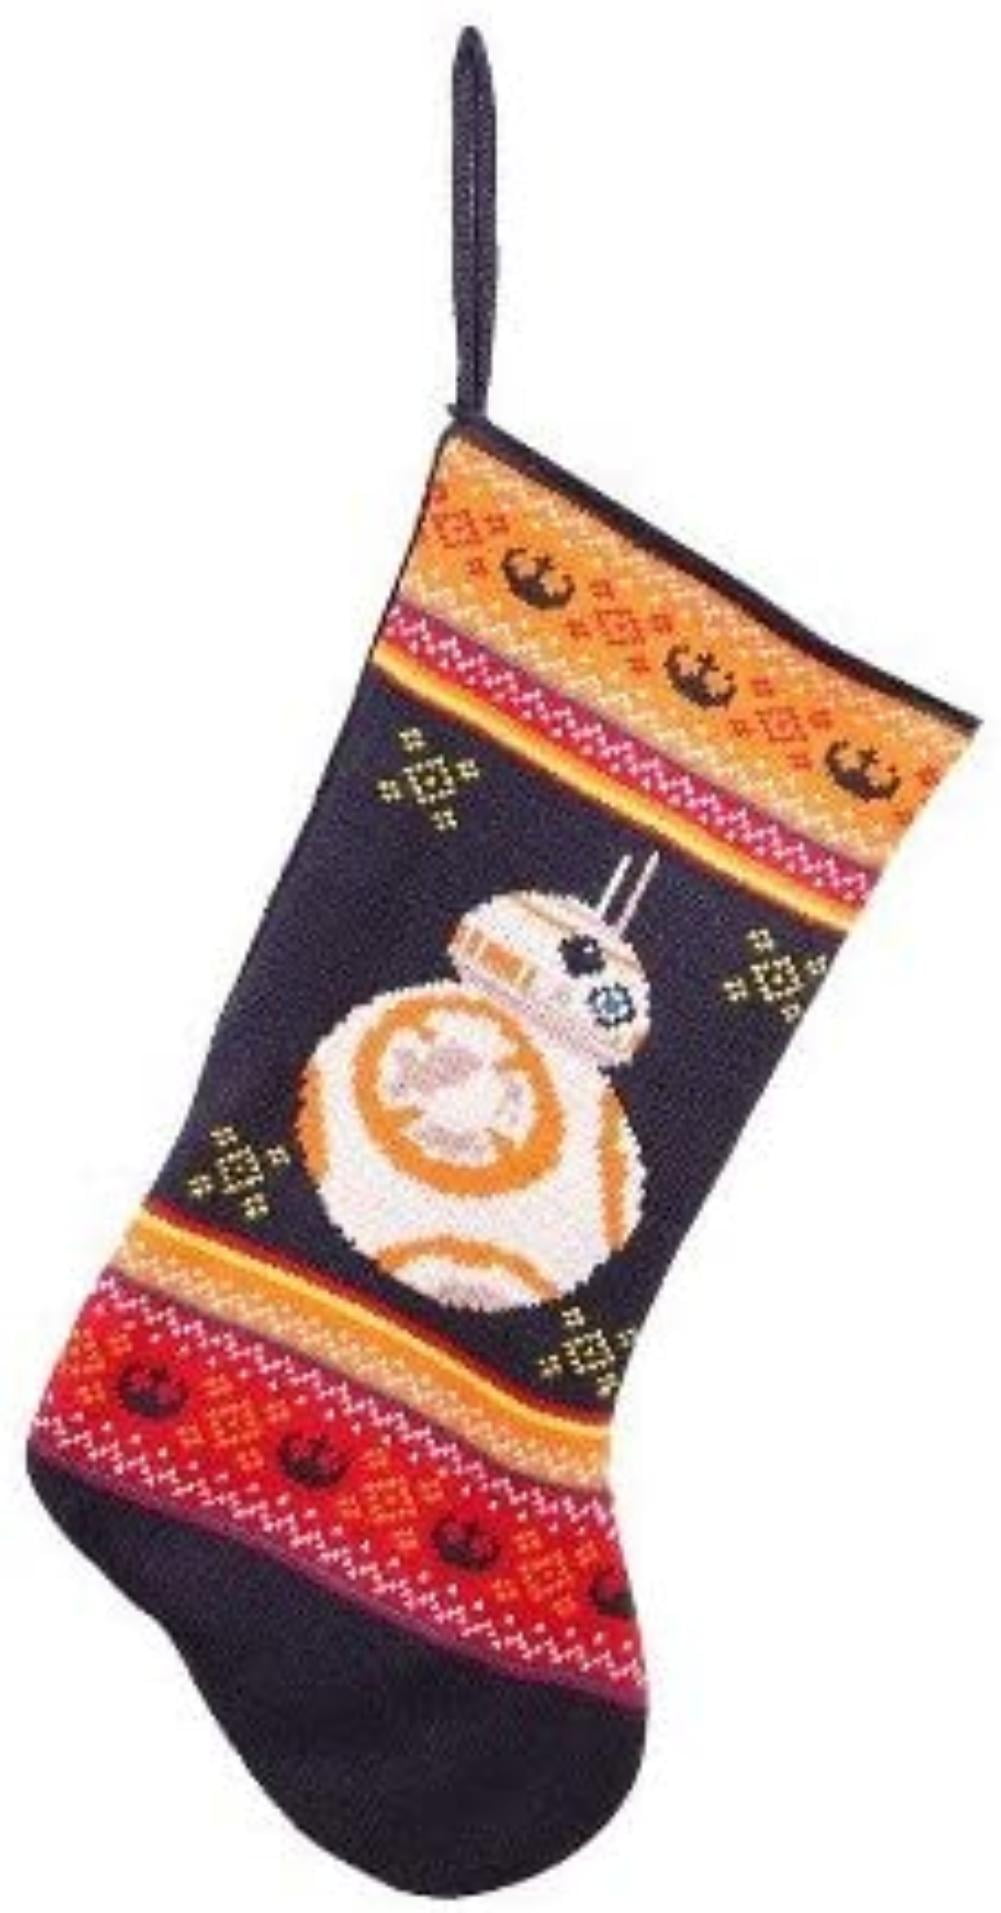 New & Official In Pack DC Comics Christmas Stocking Star Wars Harry Potter 